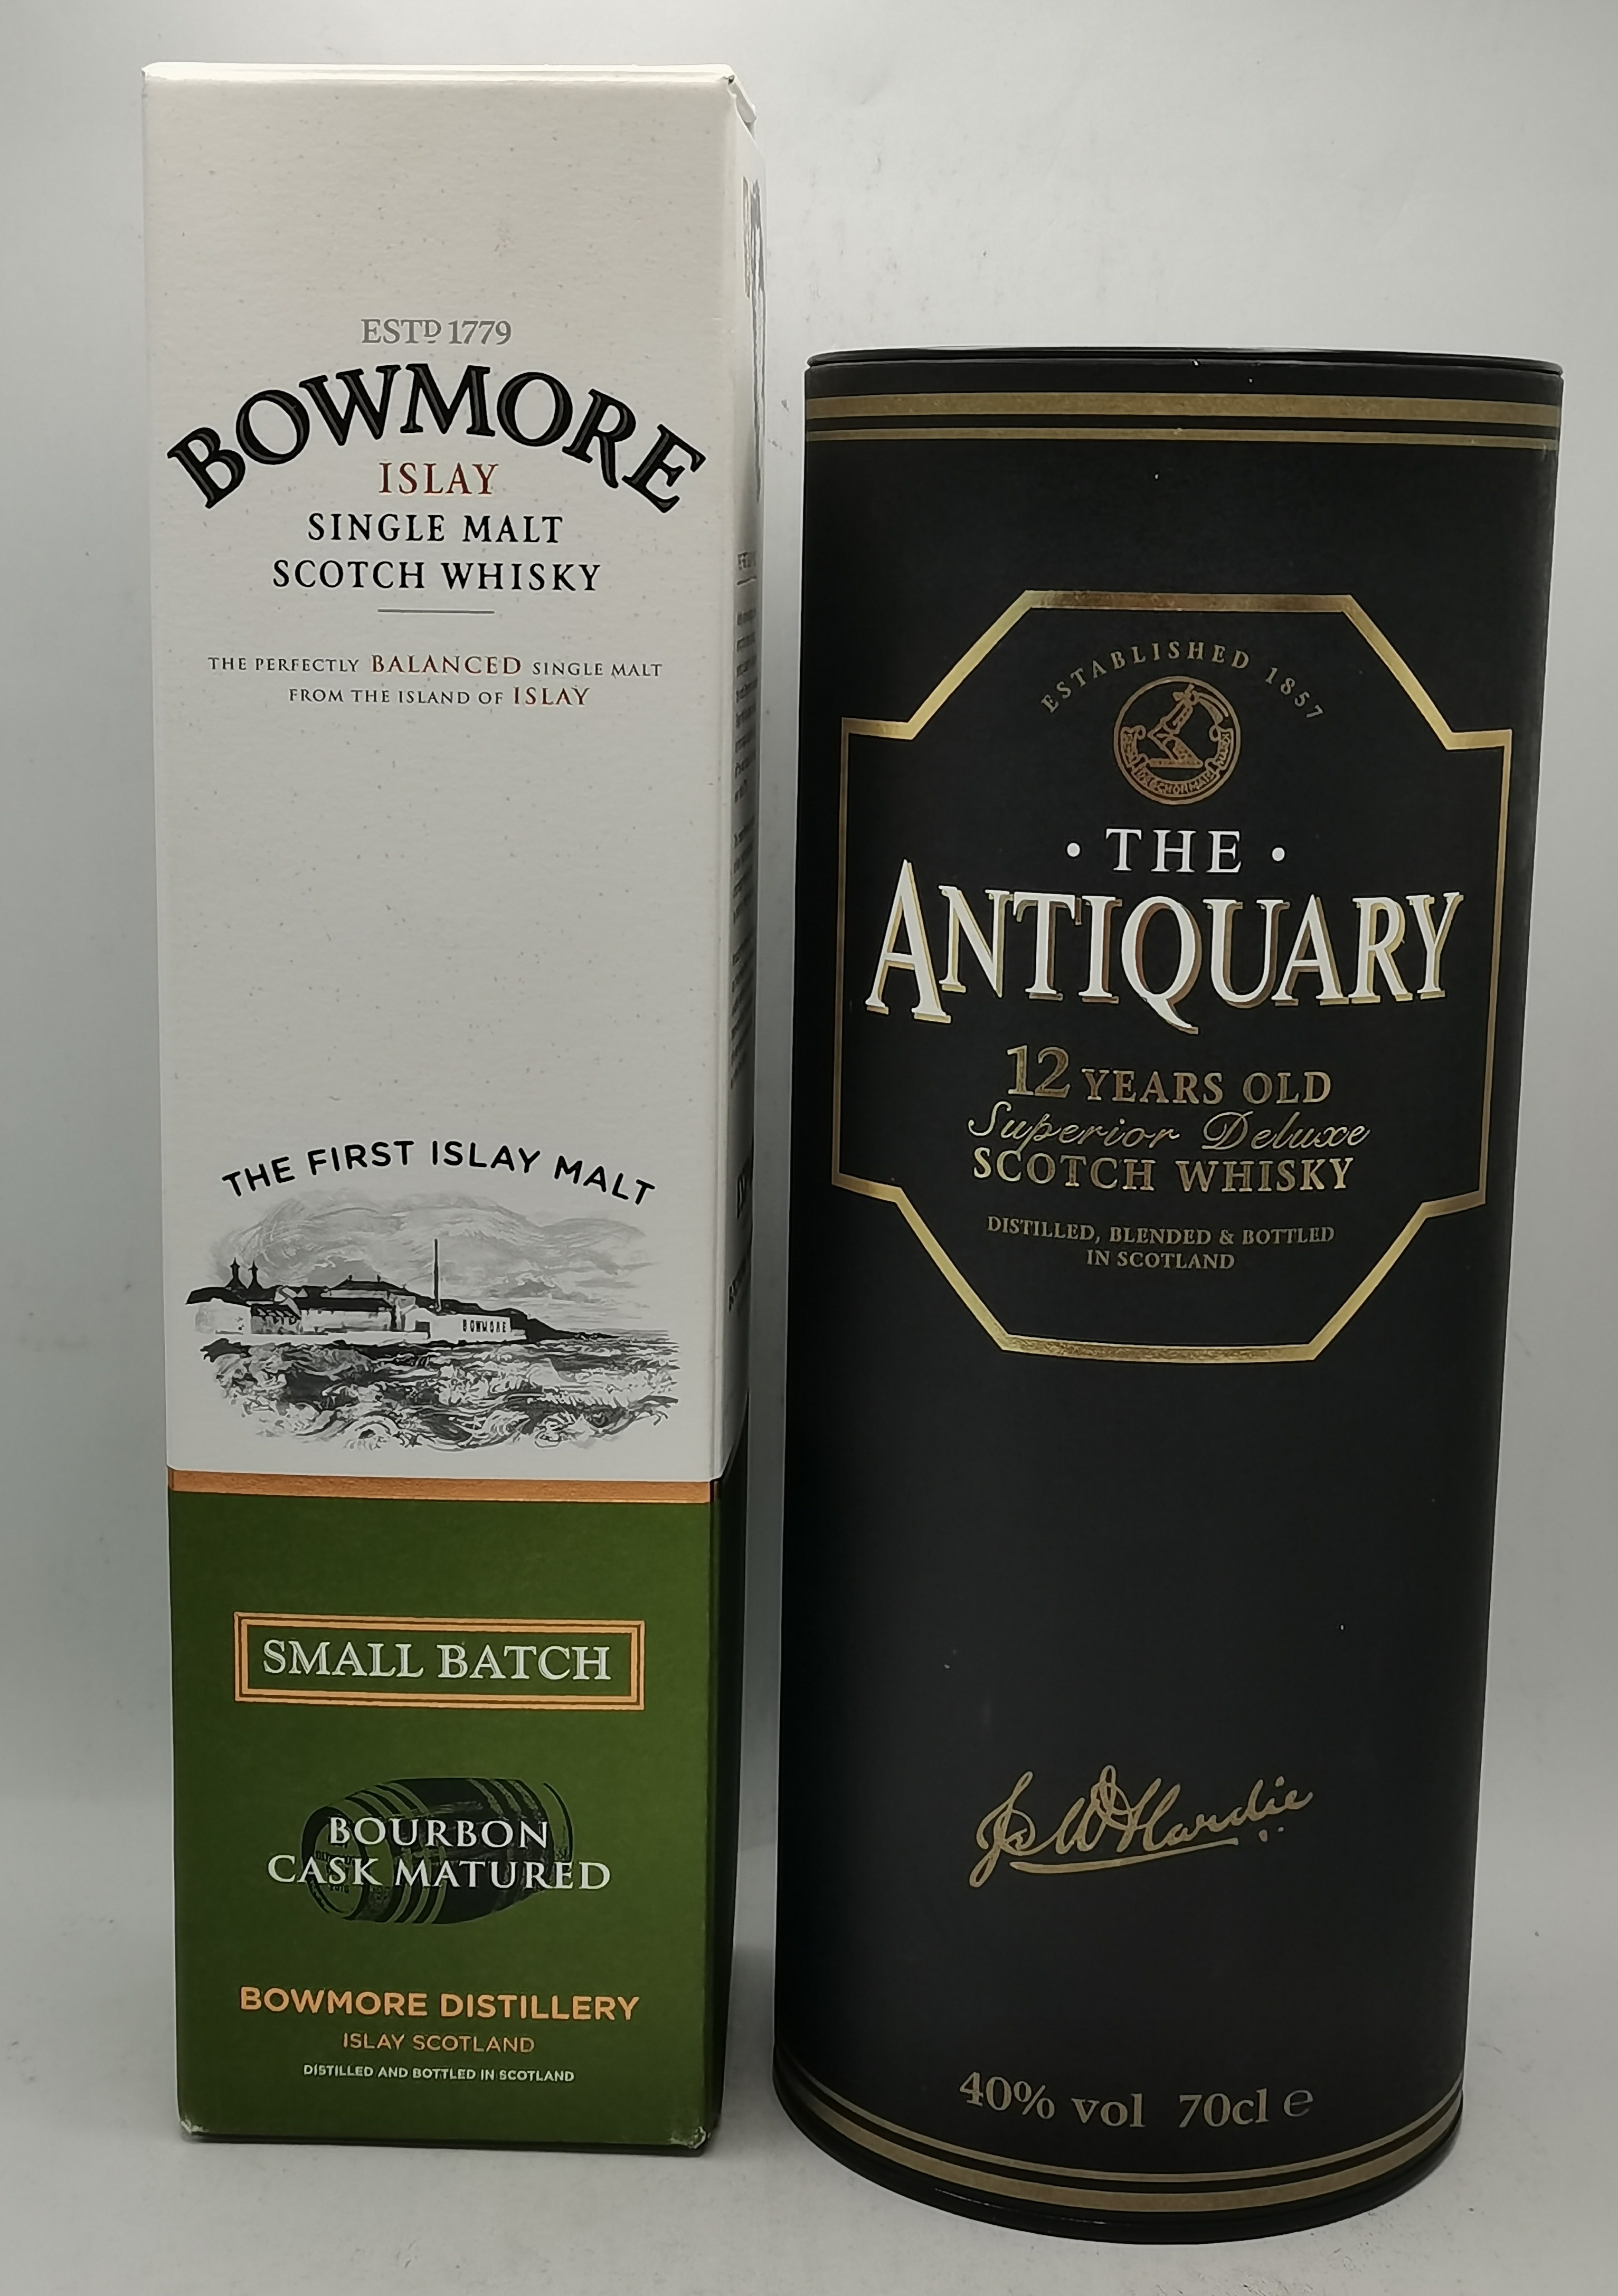 THE ANTIQUARY 12 years old superior deluxe